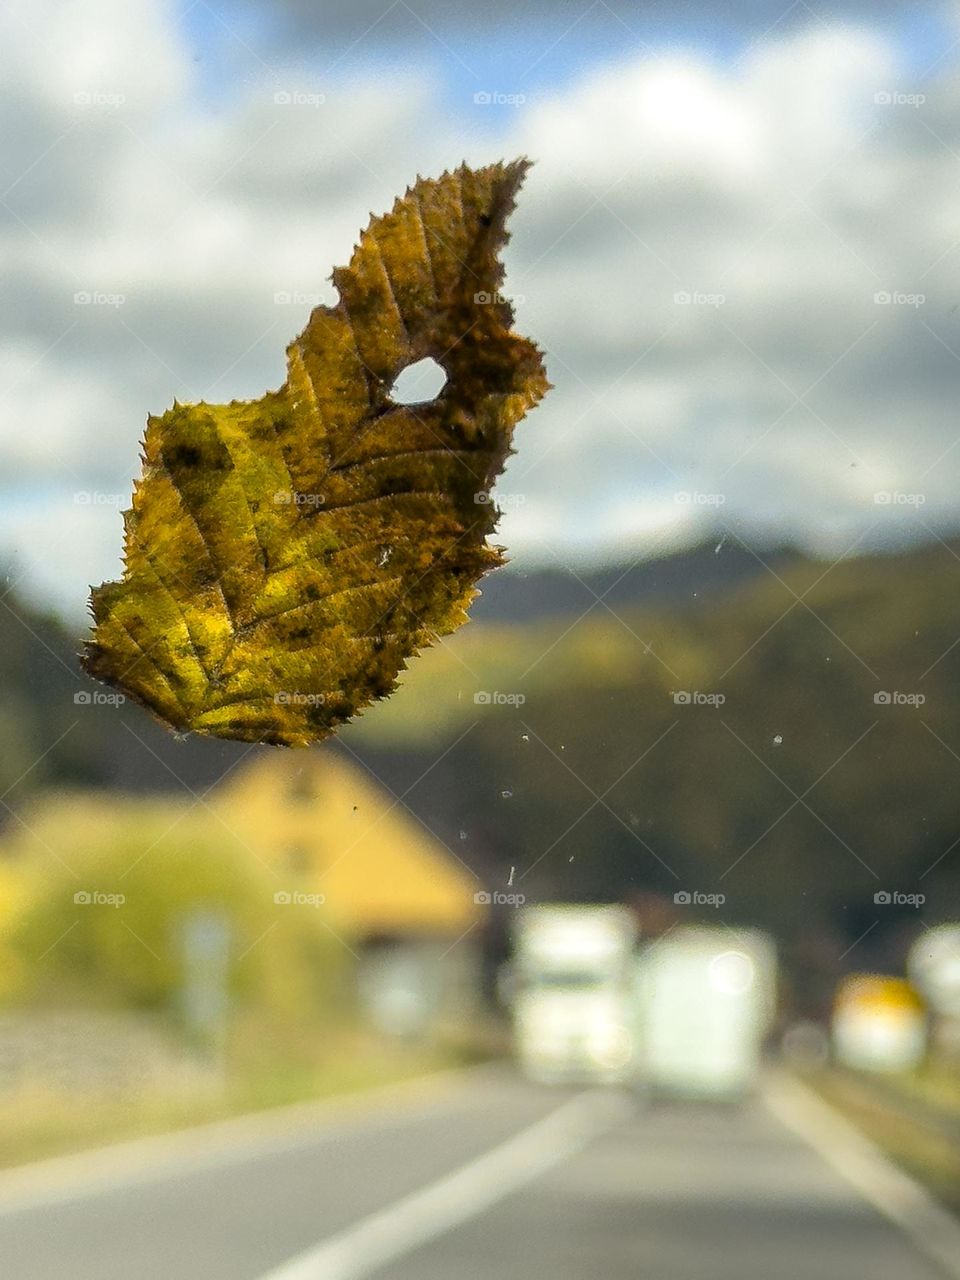 The journey of a leaf carried by the wind on a car windshield 